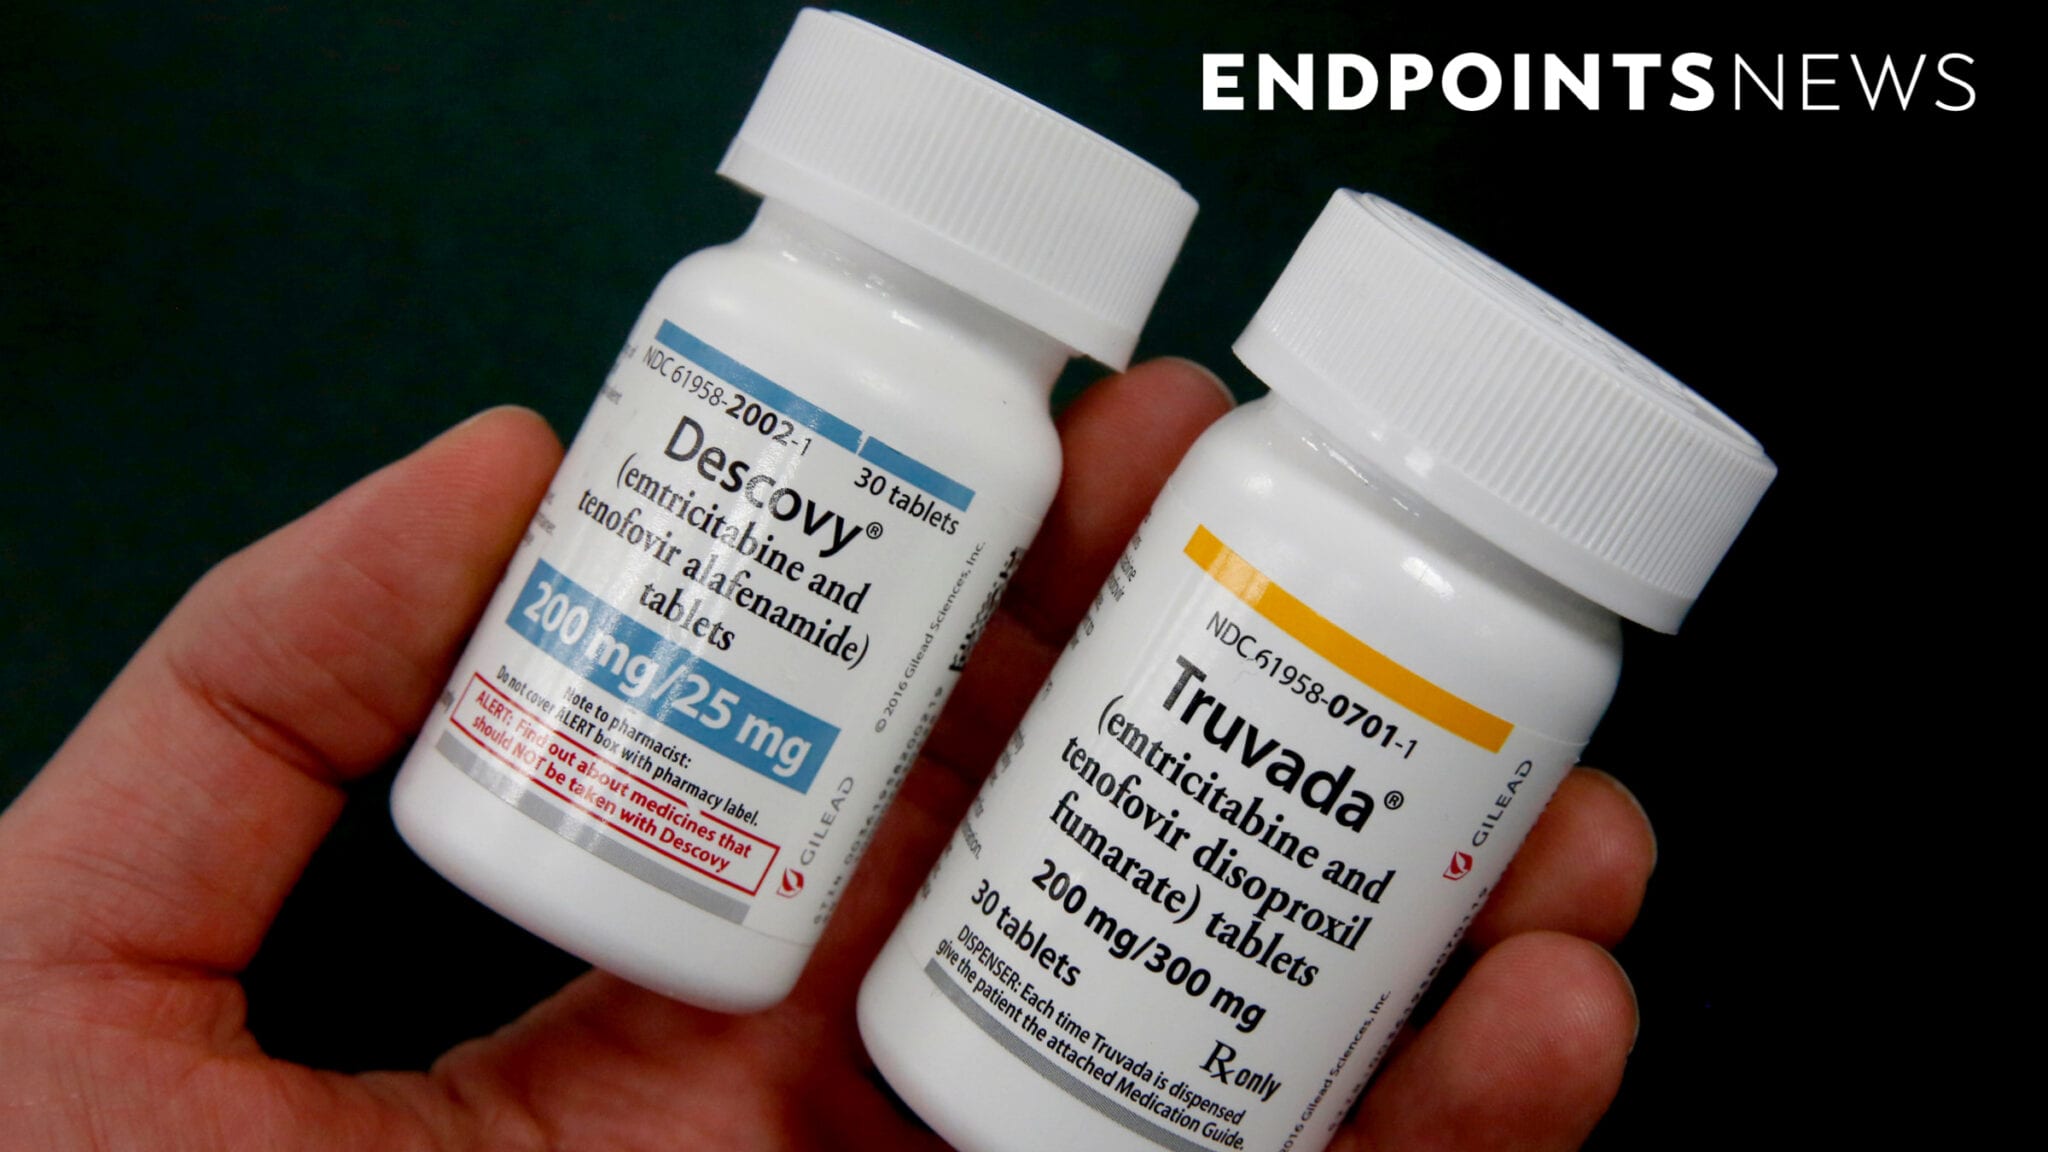 Government Panel Offers Strongest Recommendation For Prep To Prevent Hiv Endpoints News 1955